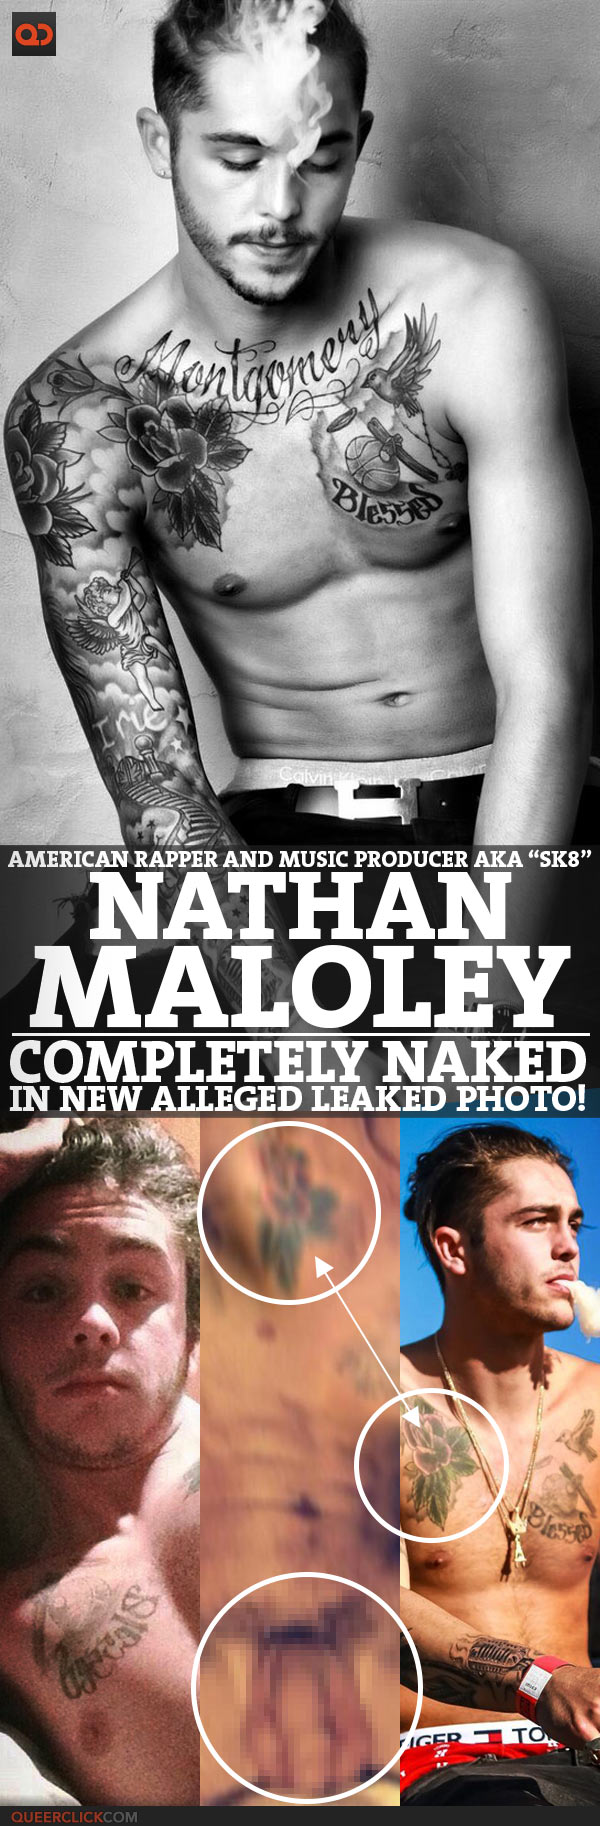 Nathan Maloley, American Rapper And Music Producer AKA “Sk8”, Completely Naked In New Alleged Leaked Photo!